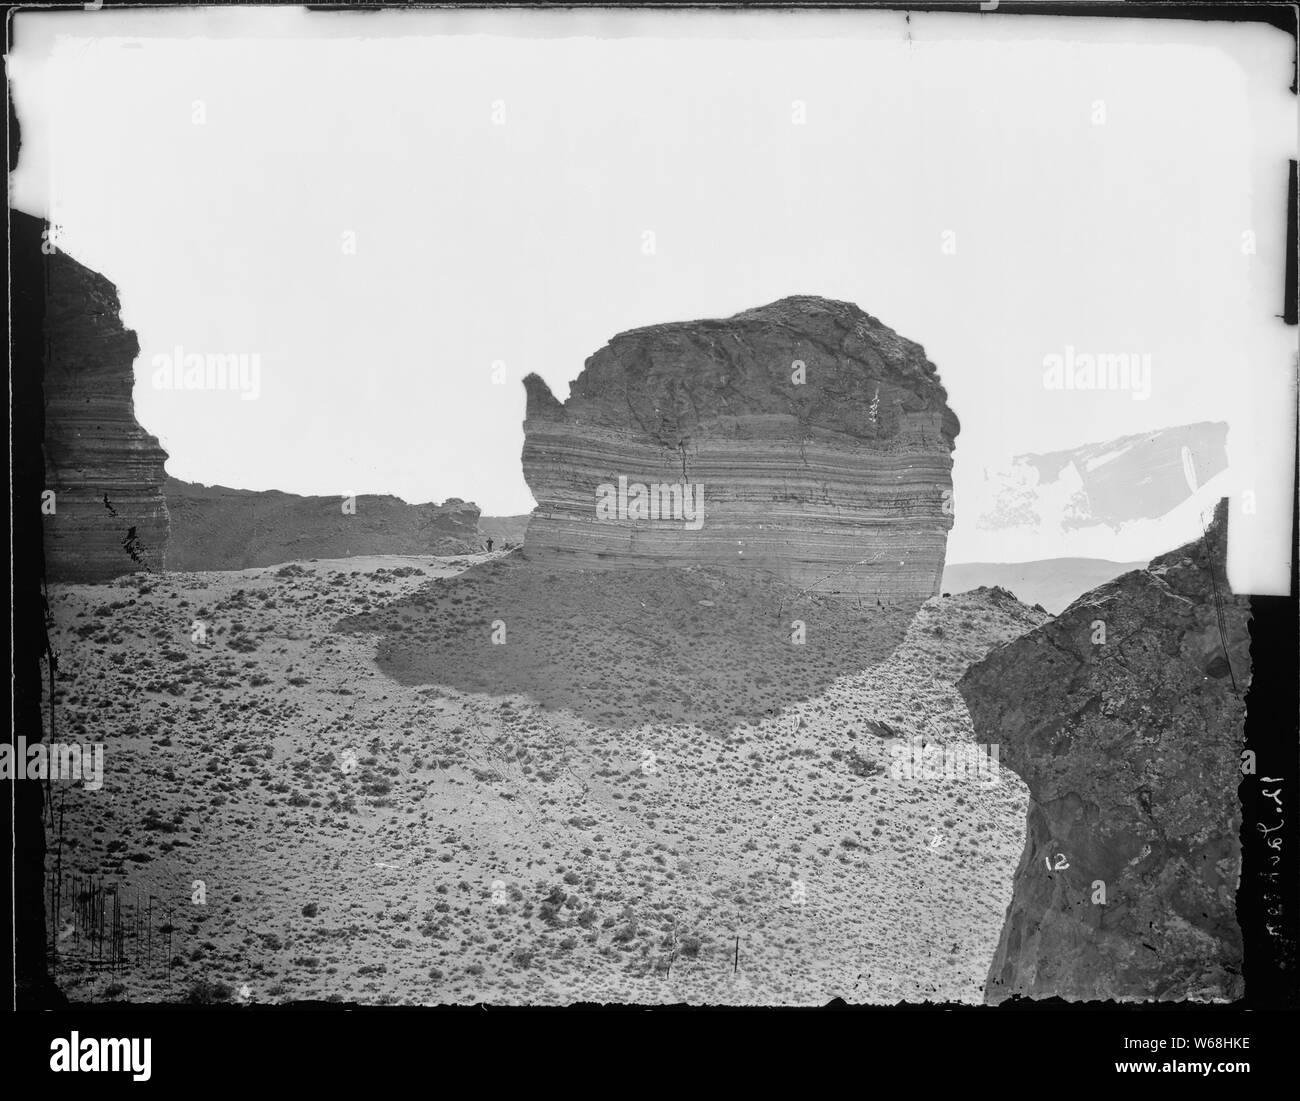 Teapot Rock, near Green River Station. Sweetwater County, Wyoming. Small figure of man at foot of spout gives an indication of size of the rock. Stock Photo